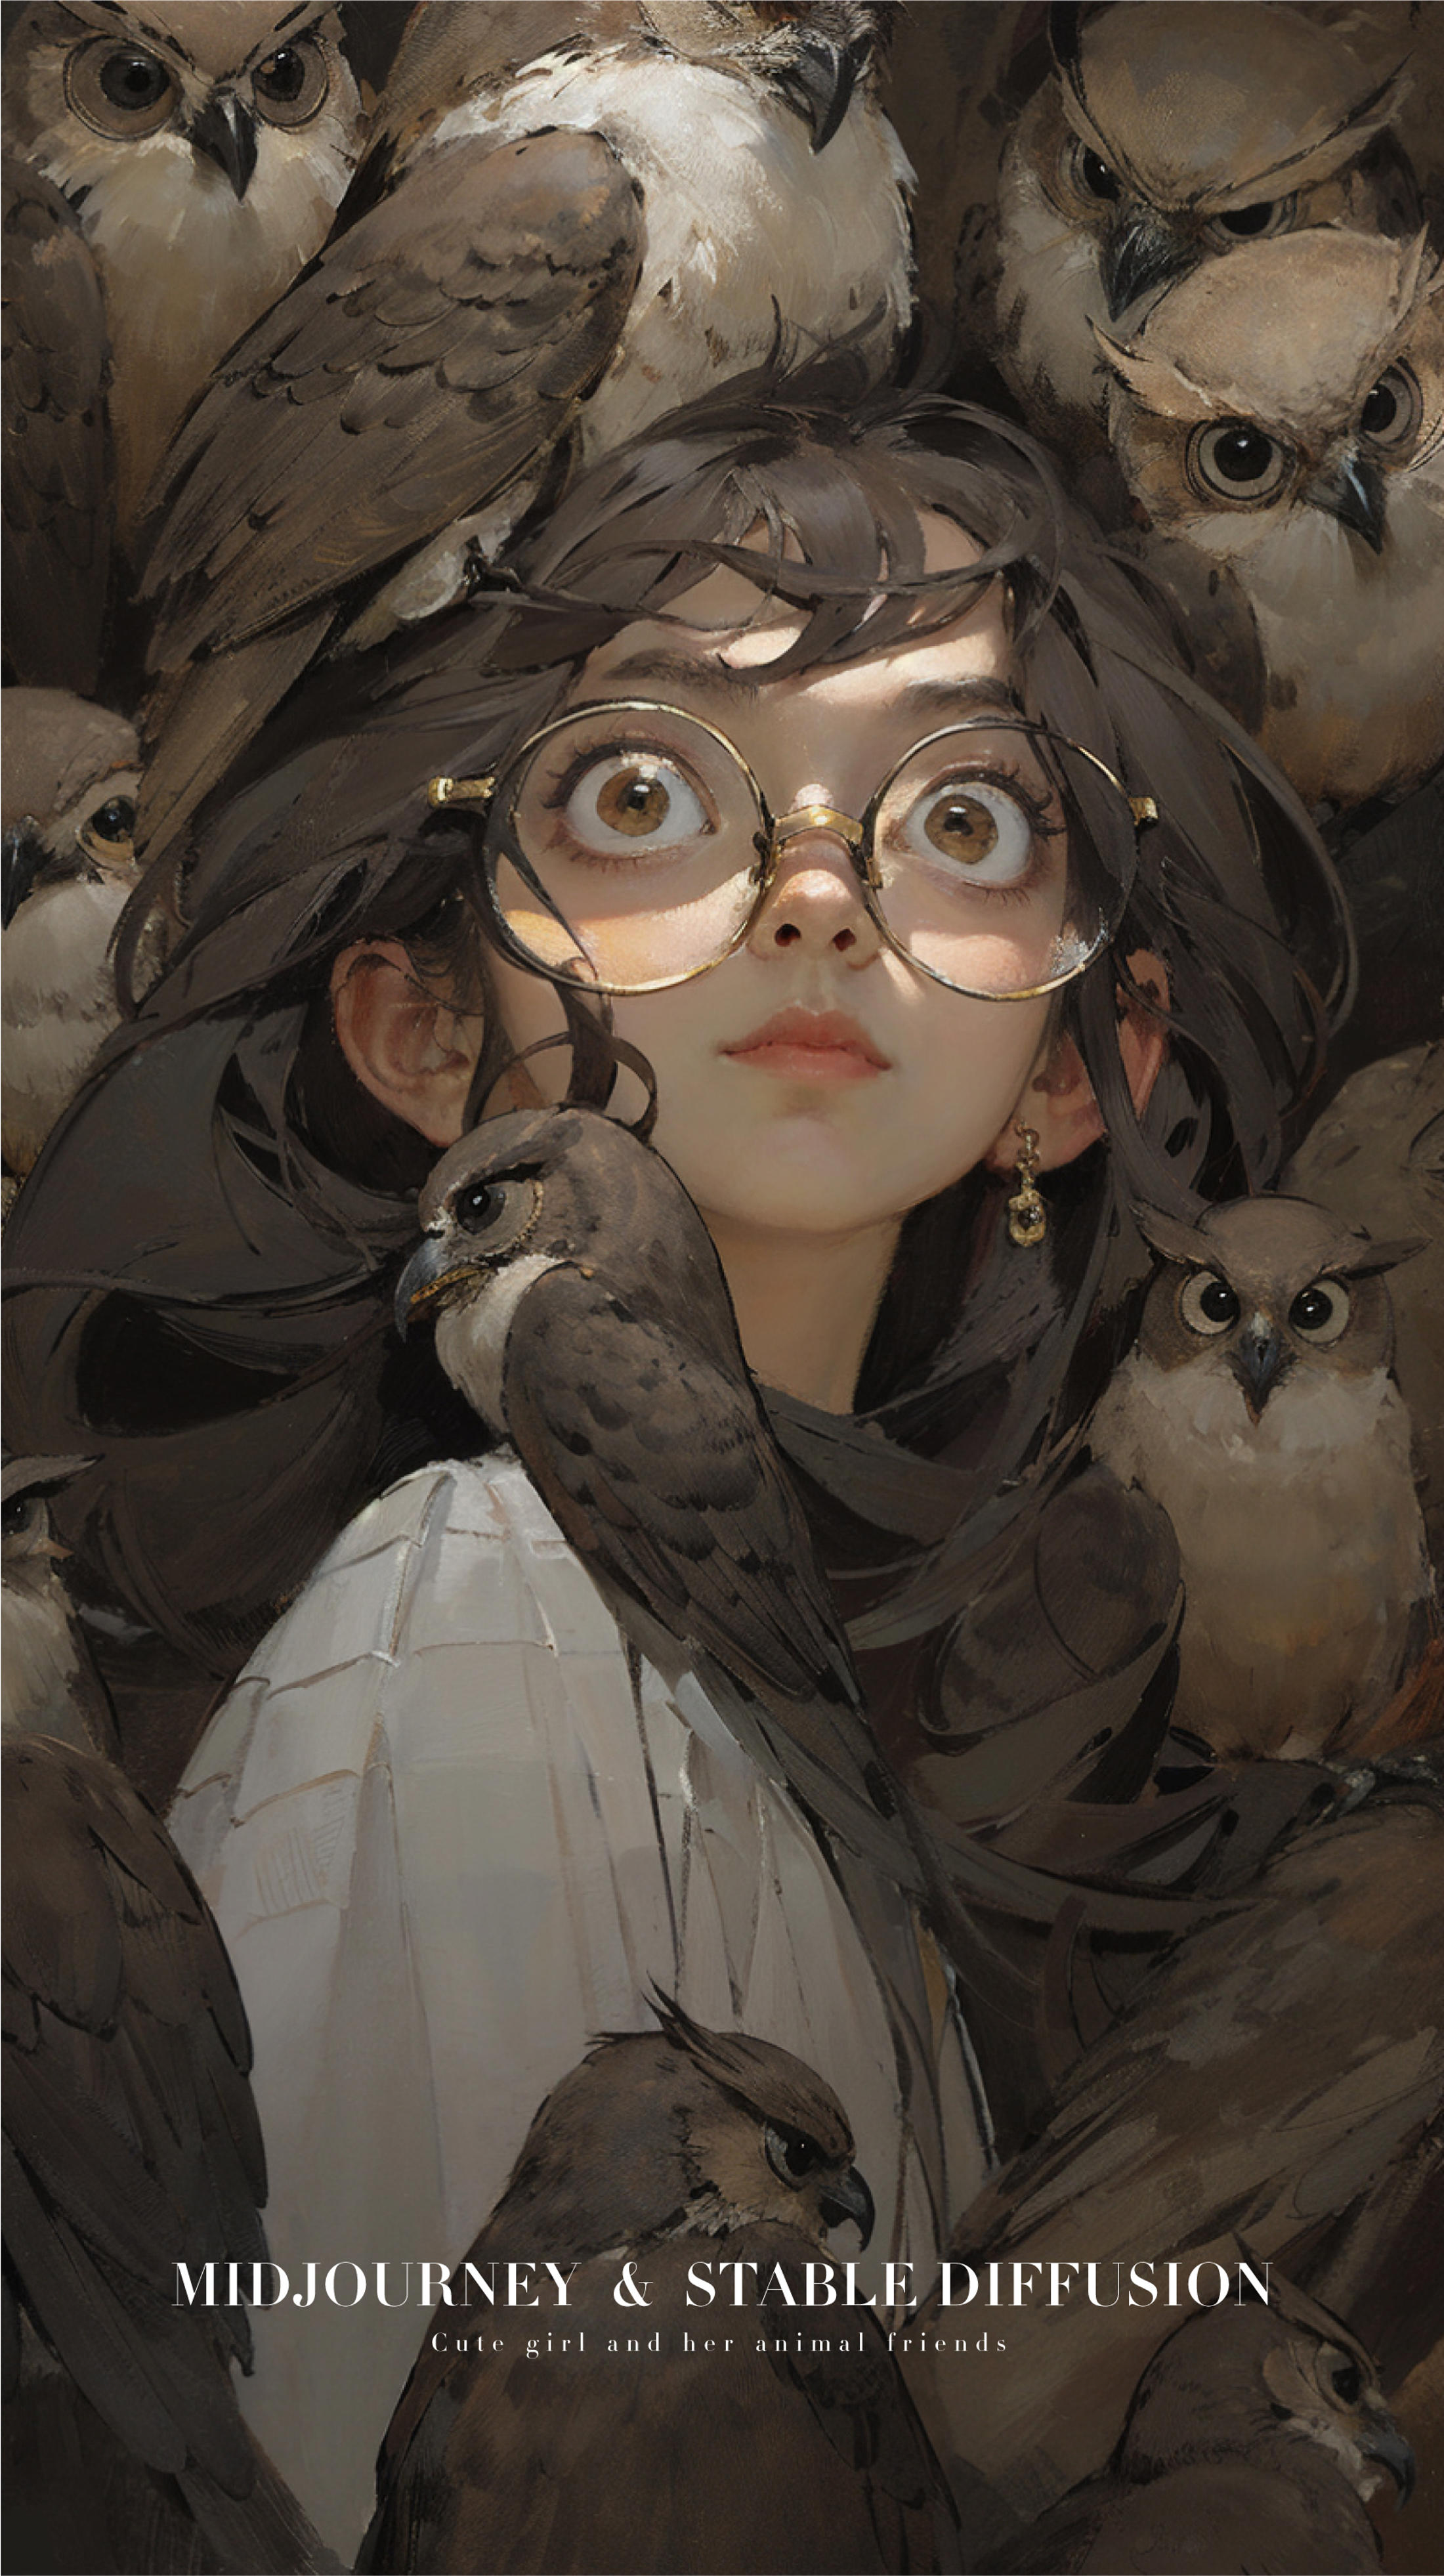 A girl with glasses surrounded by birds and owls.